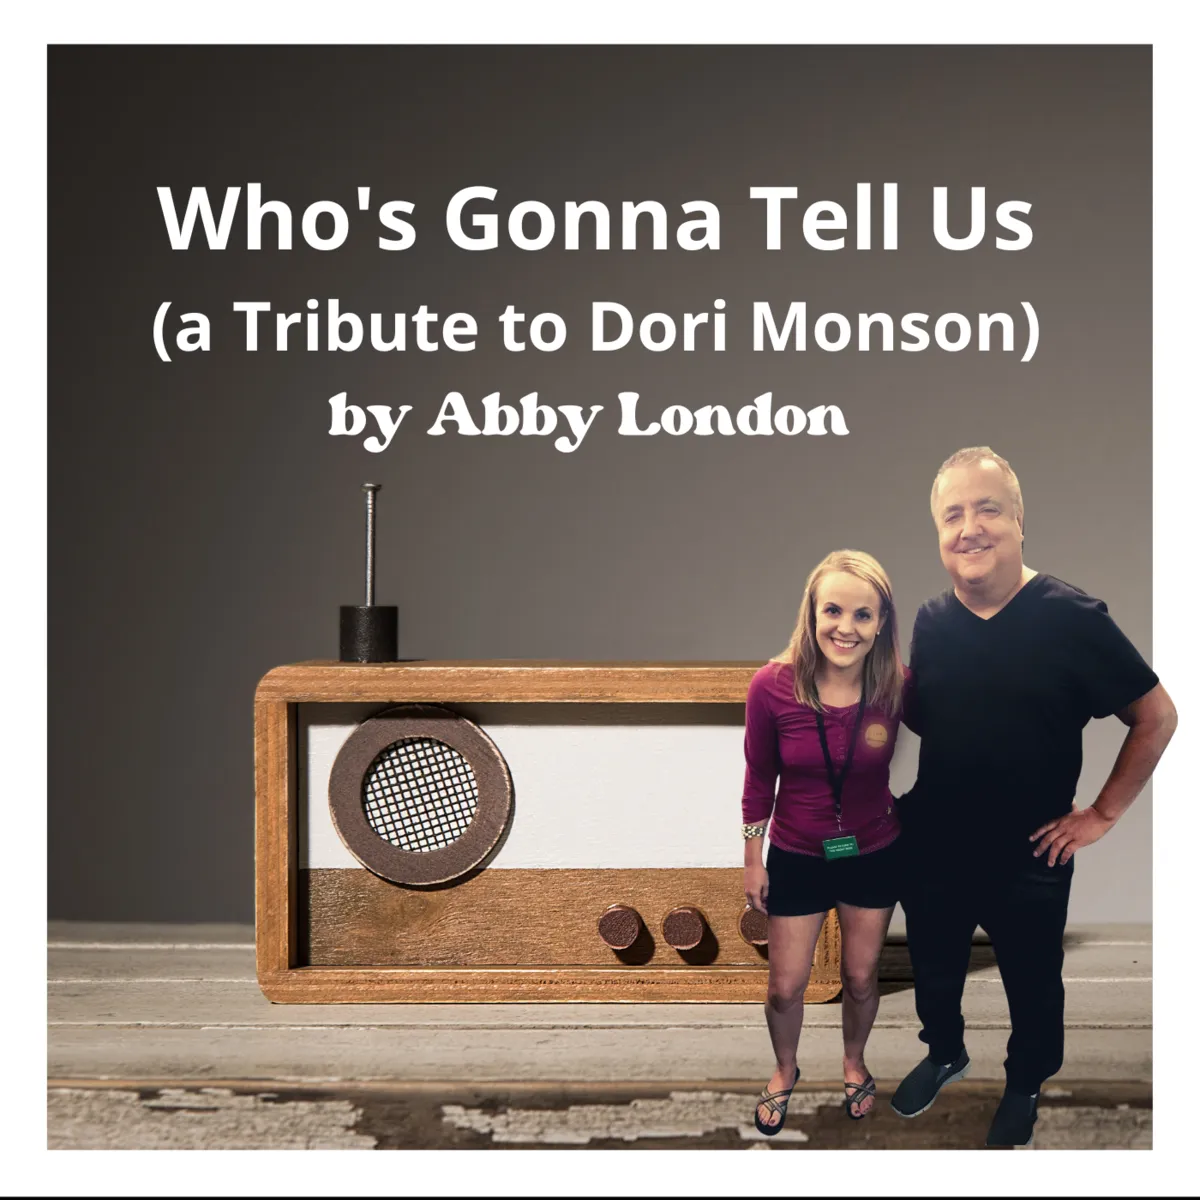 Album cover for Abby London's single 'Who's Gonna Tell Us', showcasing the distinctive artistic style of this anti-pop singer-songwriter as she honors the late Conservative Talk Show Host Dori Monson.